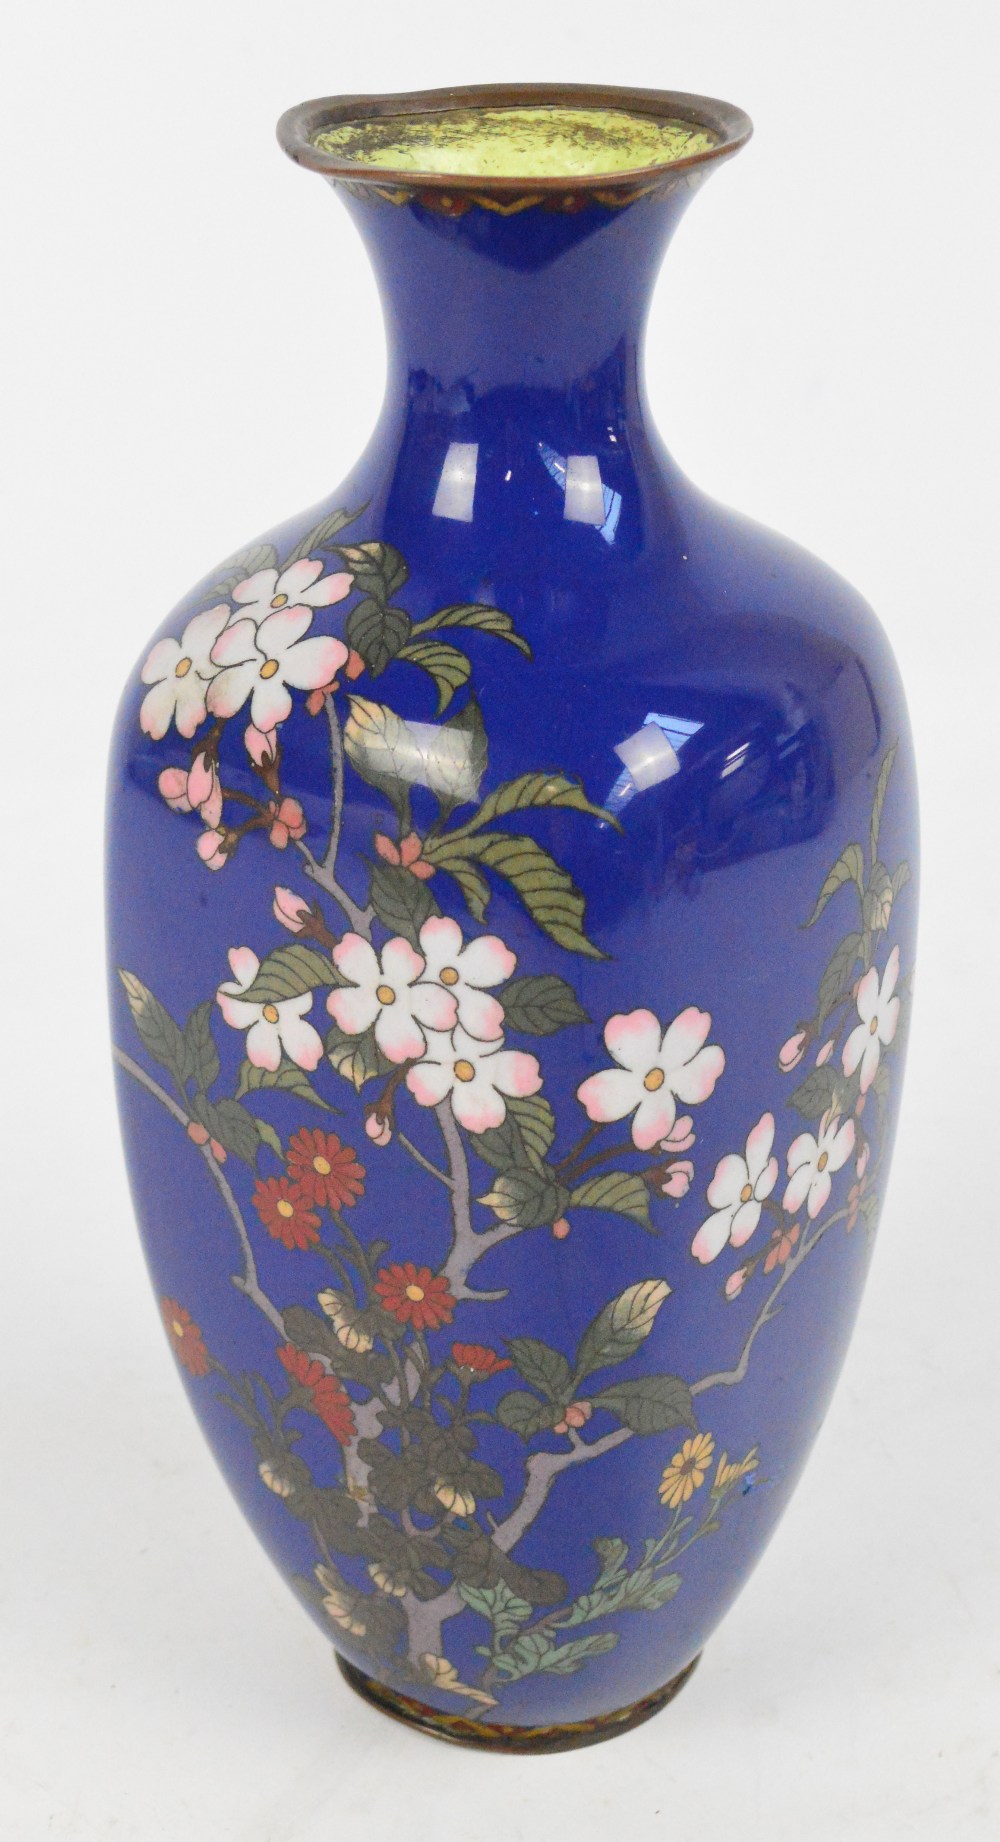 A Japanese Meiji period cloisonné enamel vase of square ovoid form with flared rim, decorated with